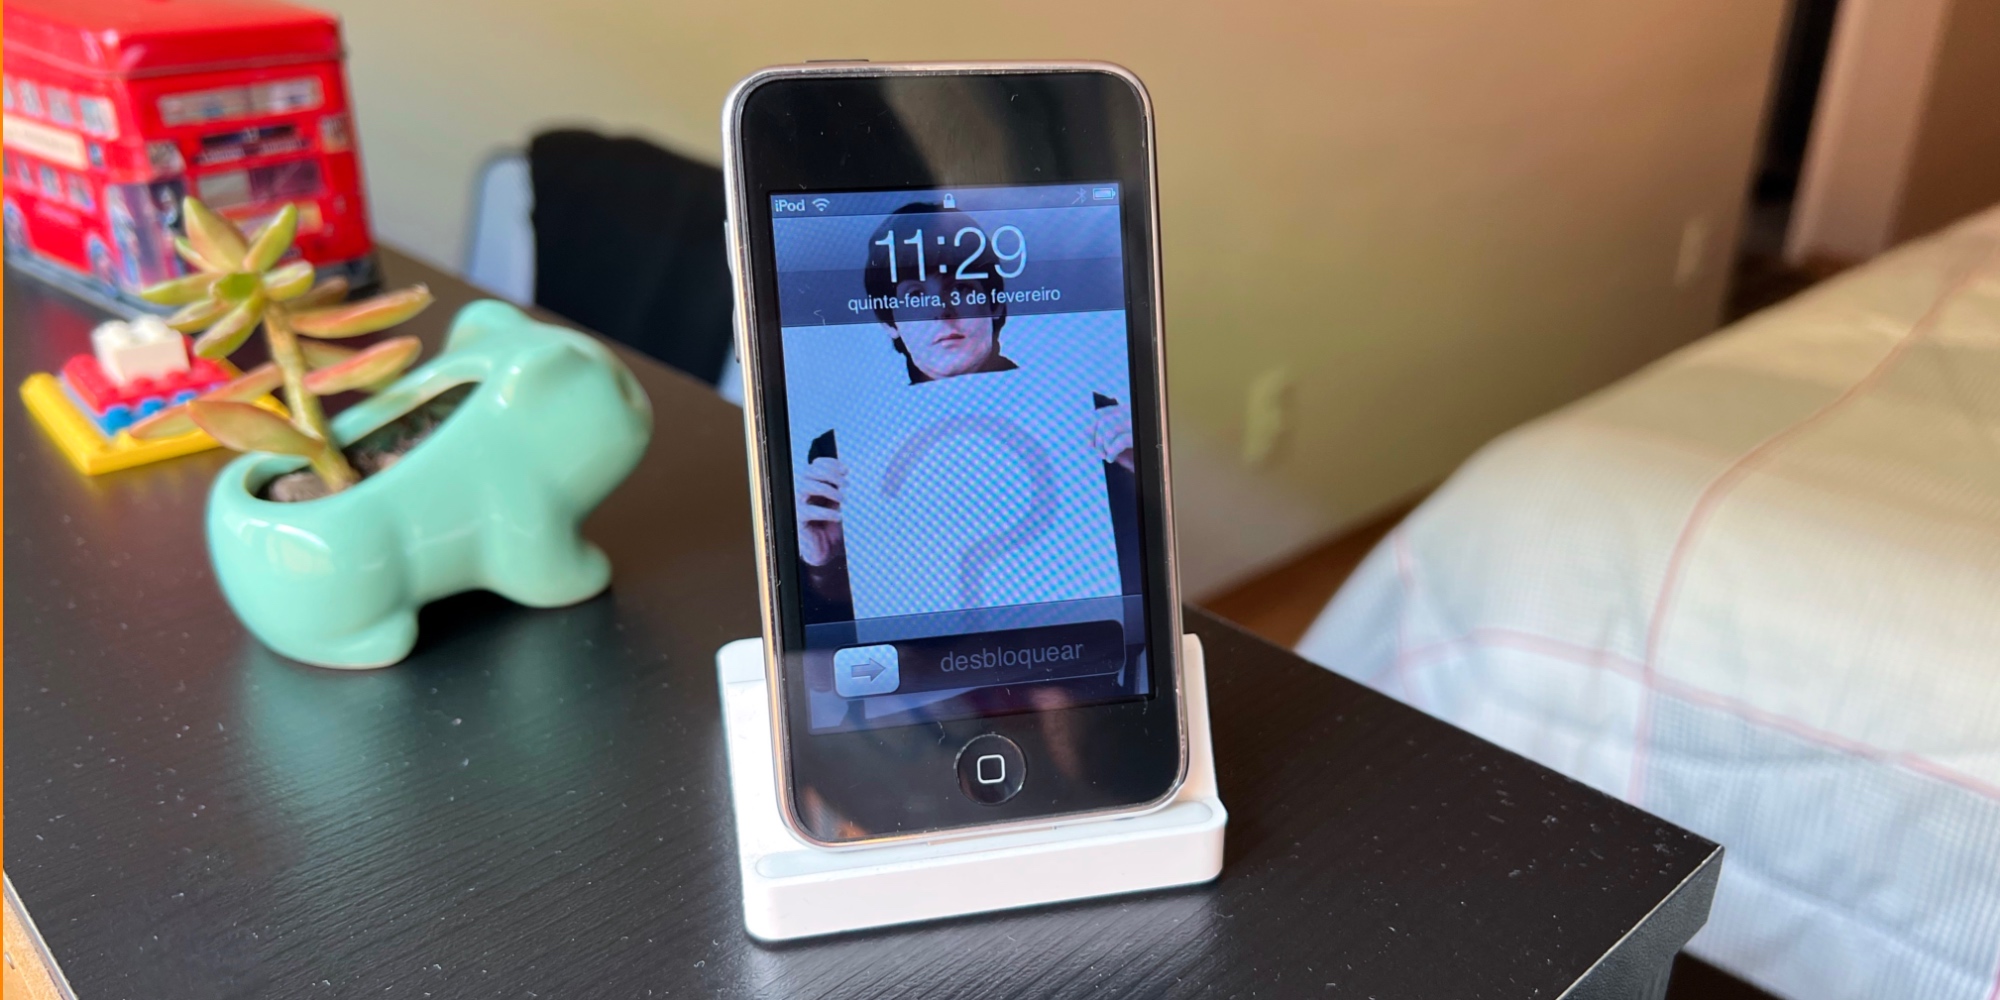 Here's what you still can do with the 2009 iPod touch in 2022